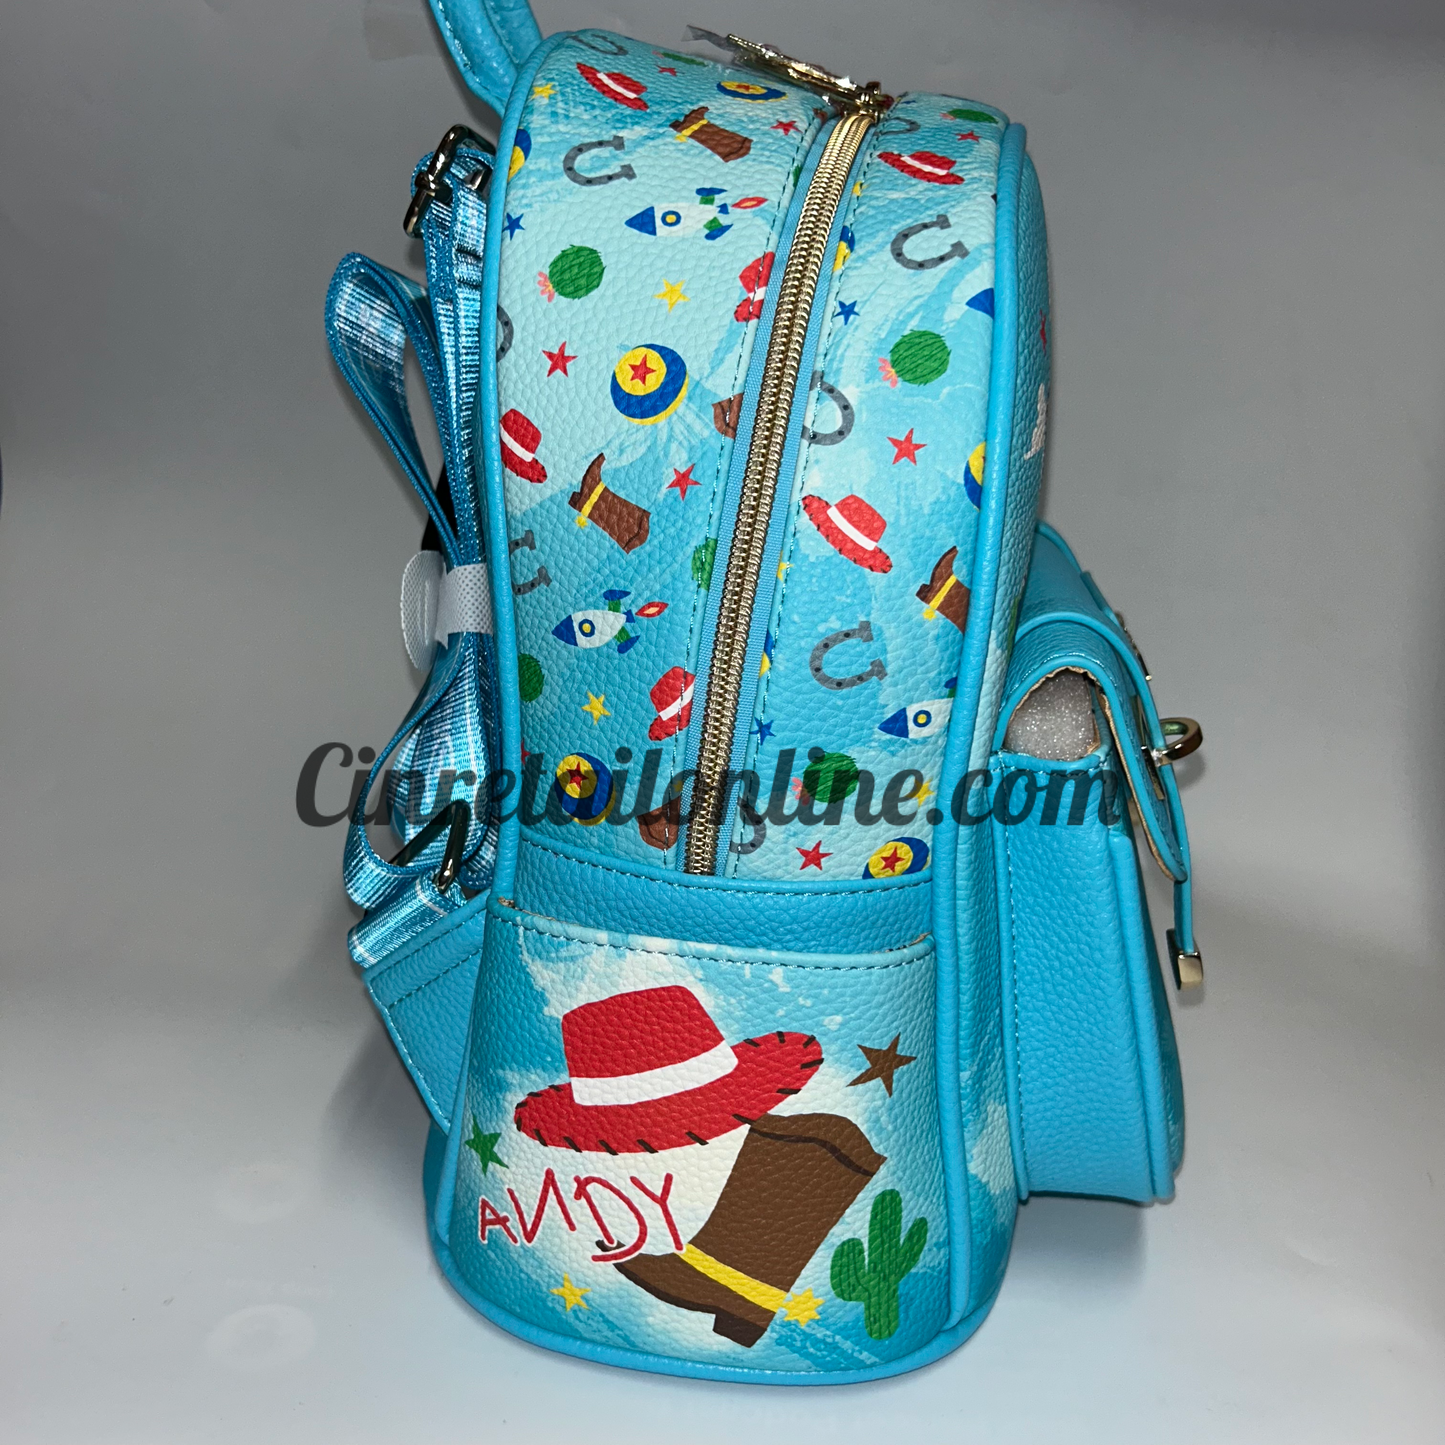 Toy Story Disney Backpack